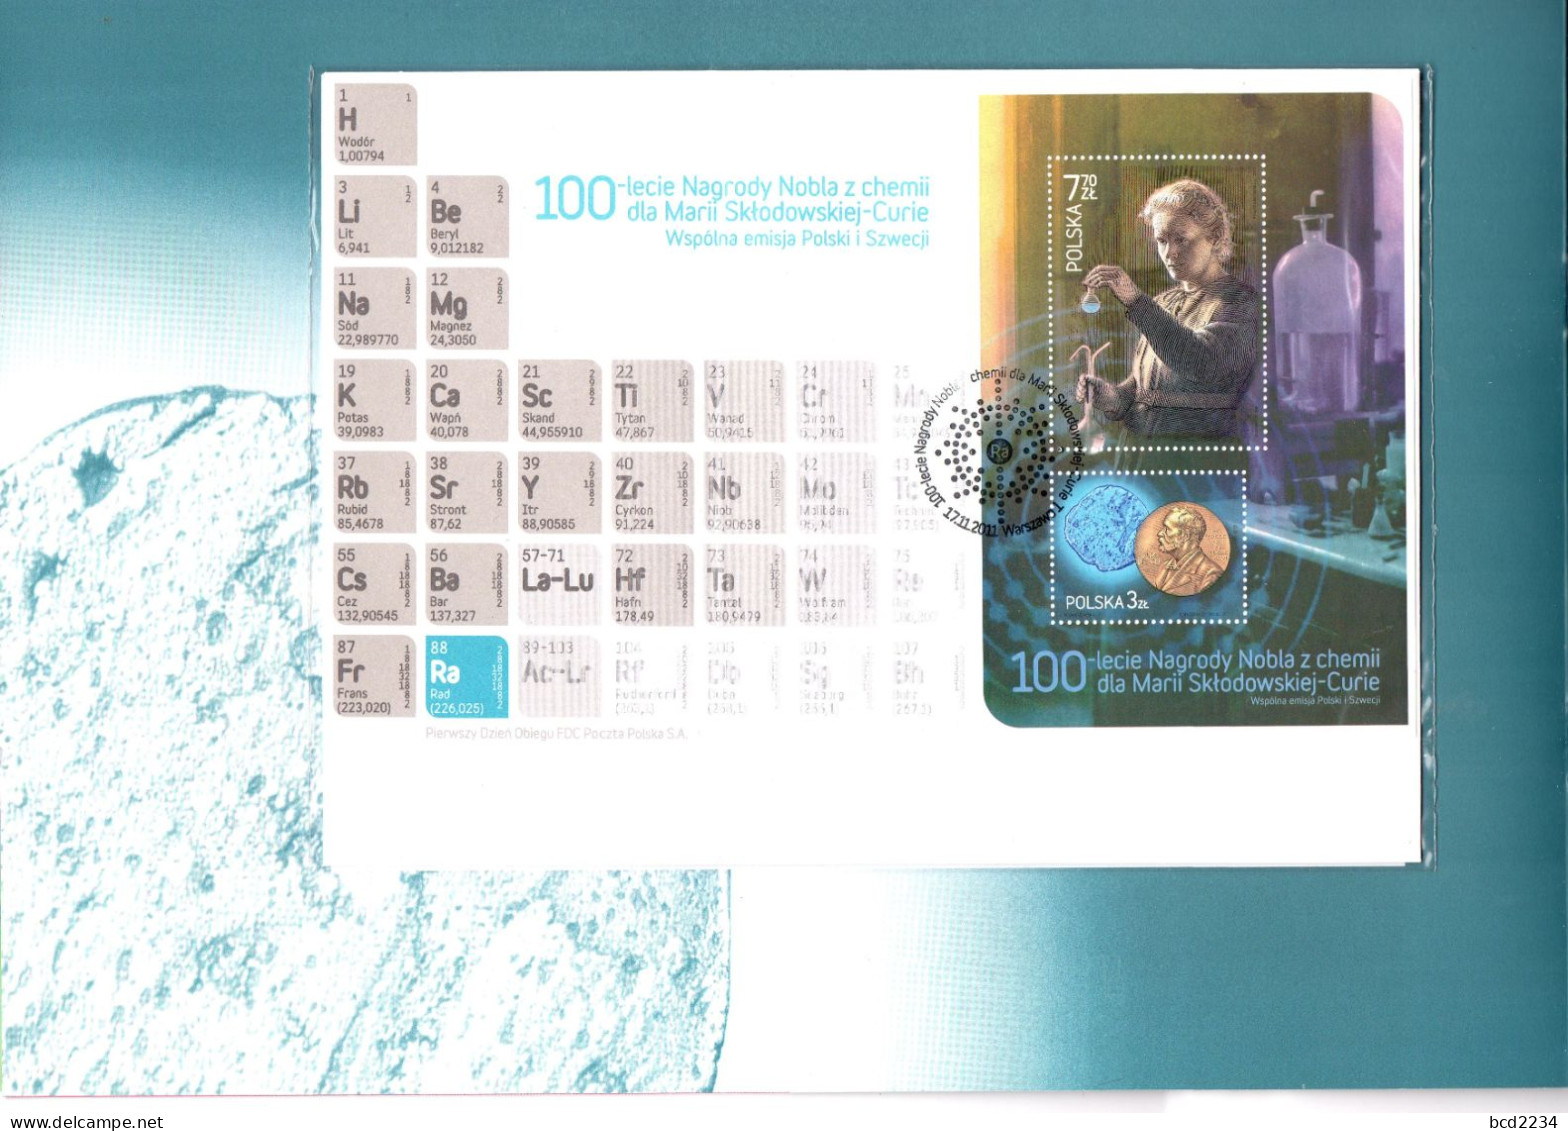 POLAND 2011 LIMITED EDITION: RARE 100TH ANNIVERSARY MARIE CURIE NOBEL PRIZE CHEMISTRY FOLDER FDC MS PL SWEDEN - Chemistry